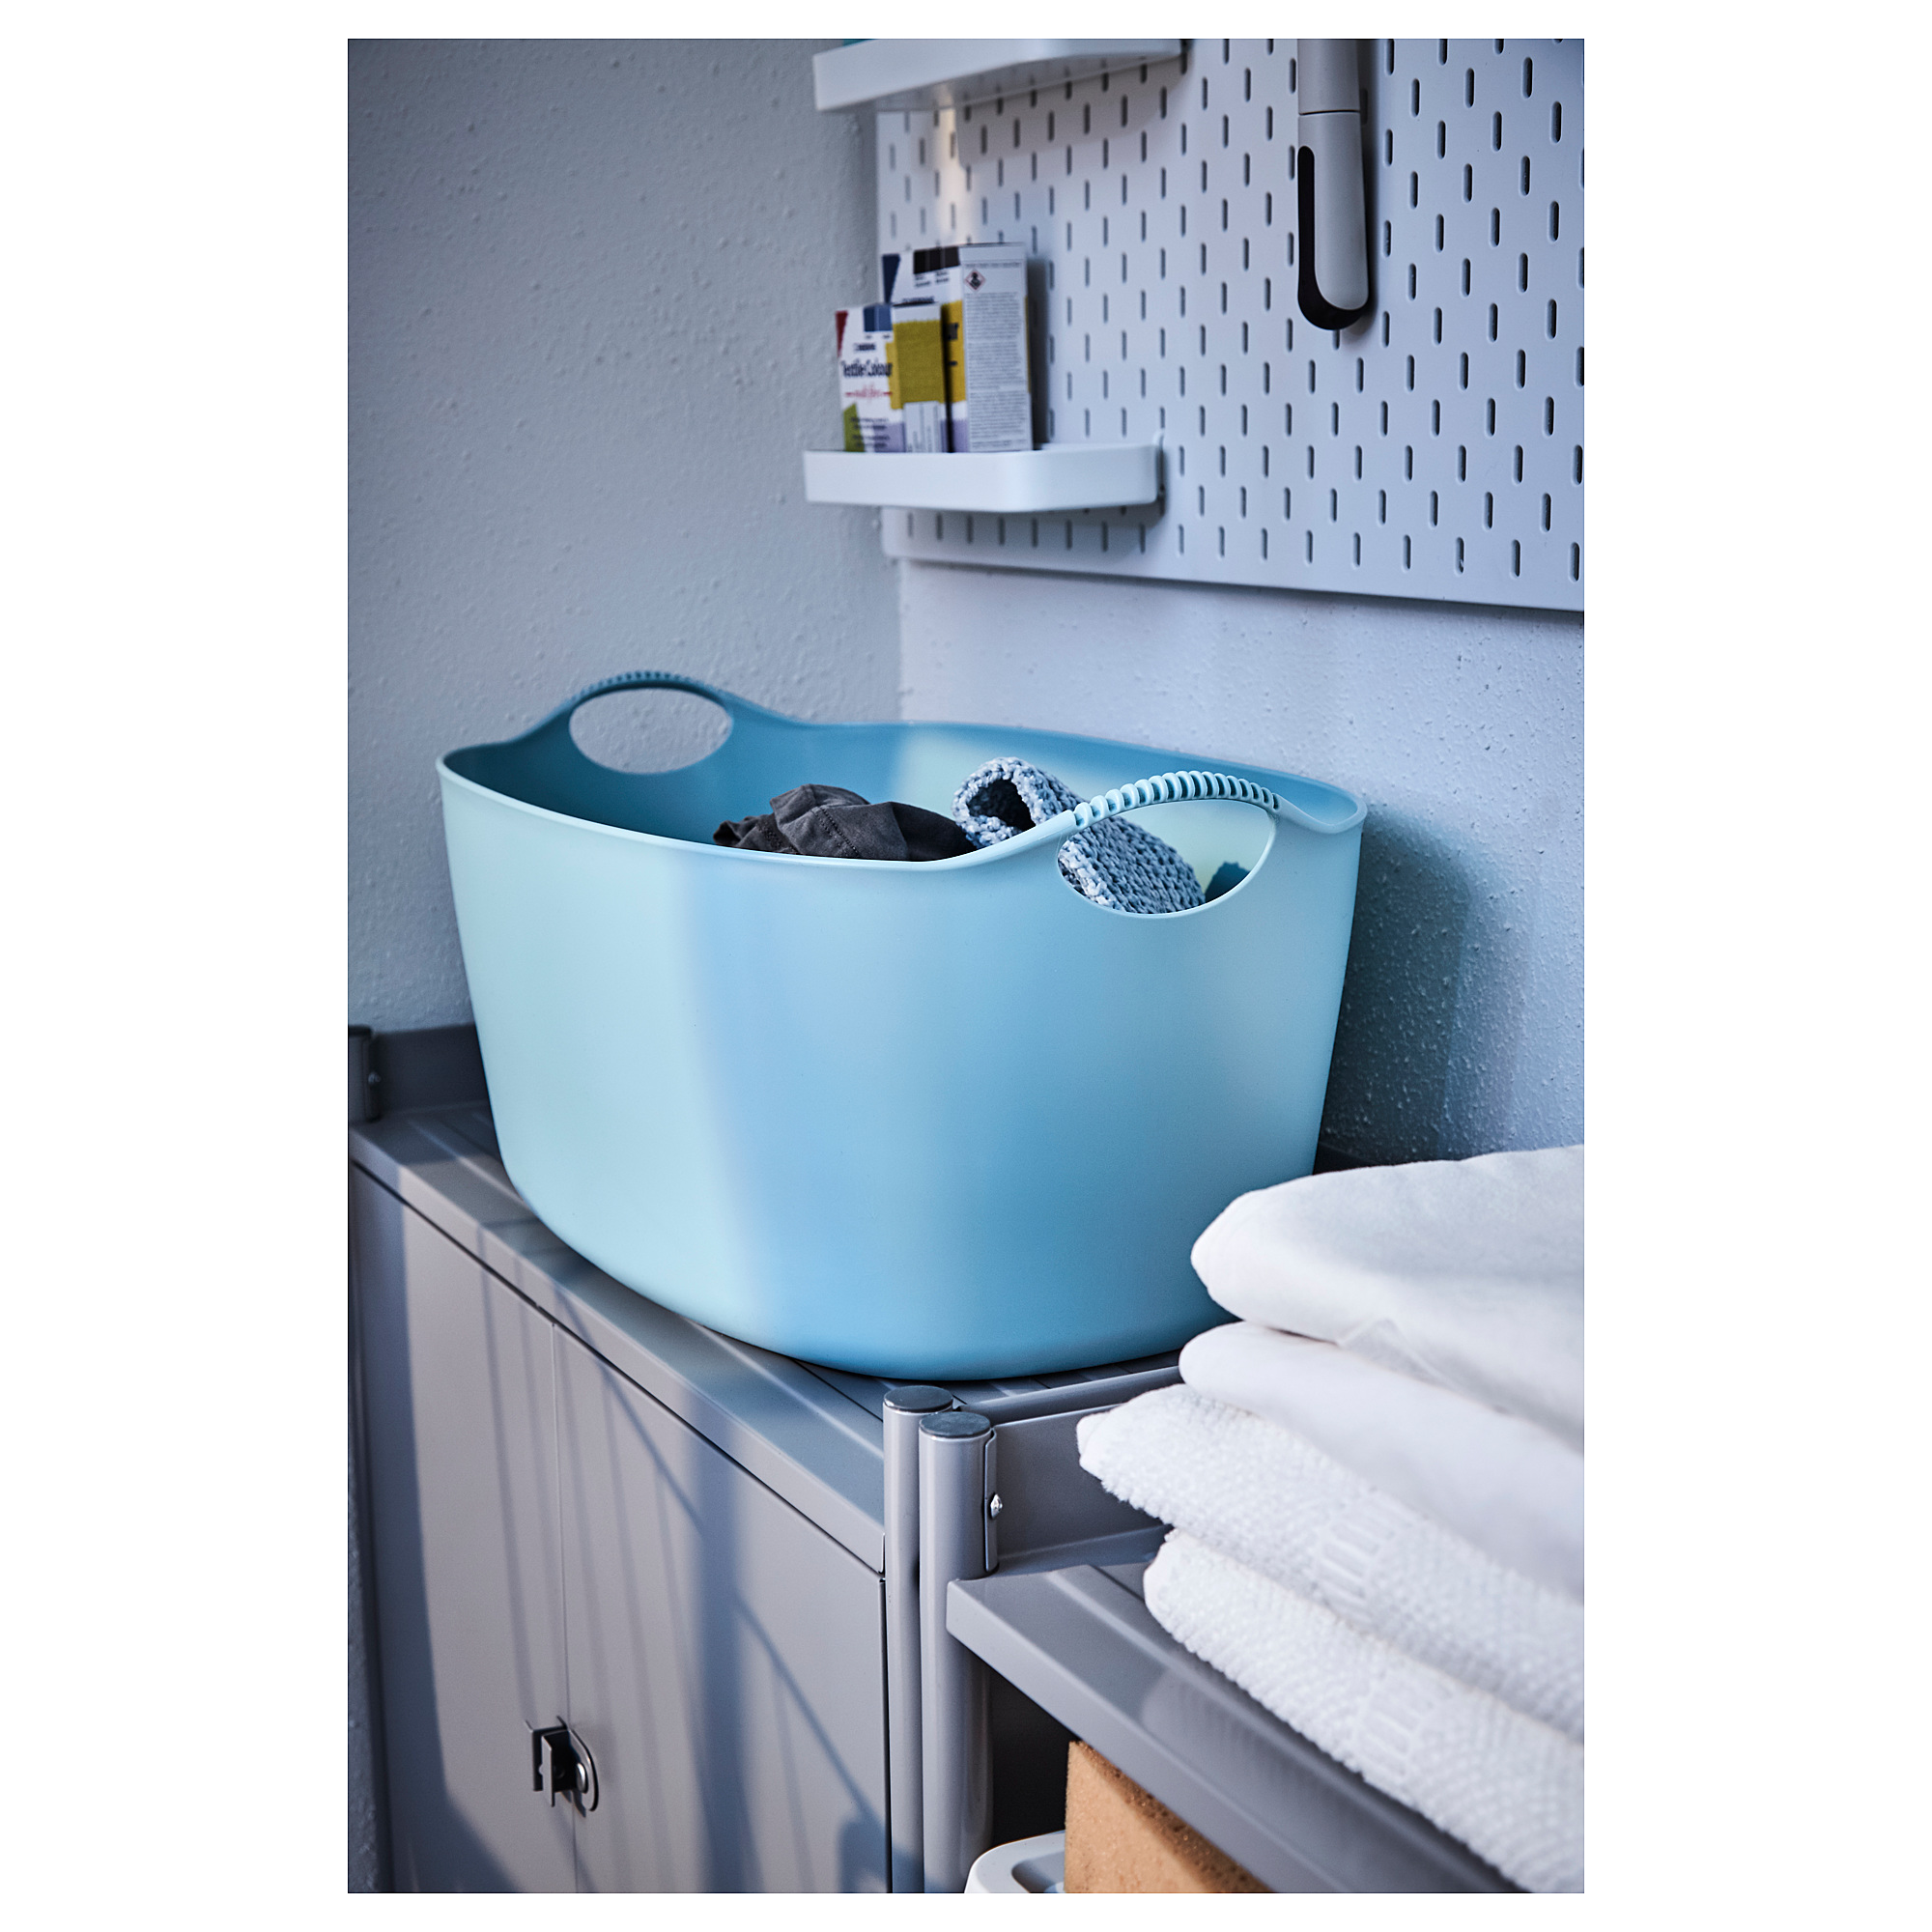 TORKIS flexi laundry basket, in-/outdoor